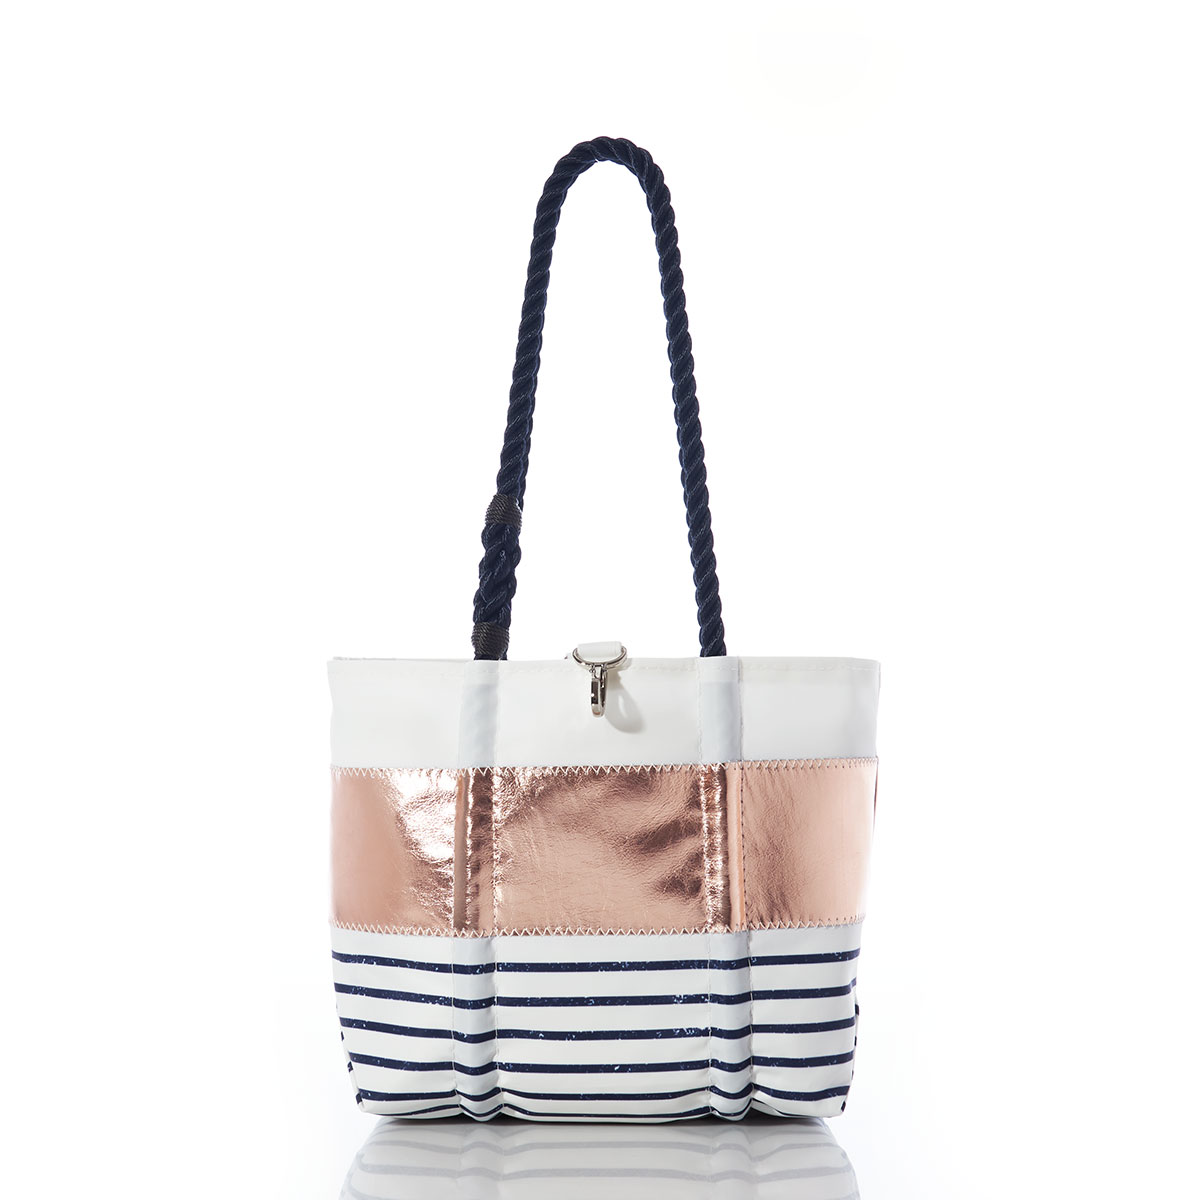 stripes of white, rose gold leather applique, and navy and white sailor stripes on a recycled sail cloth handbag with navy rope handles